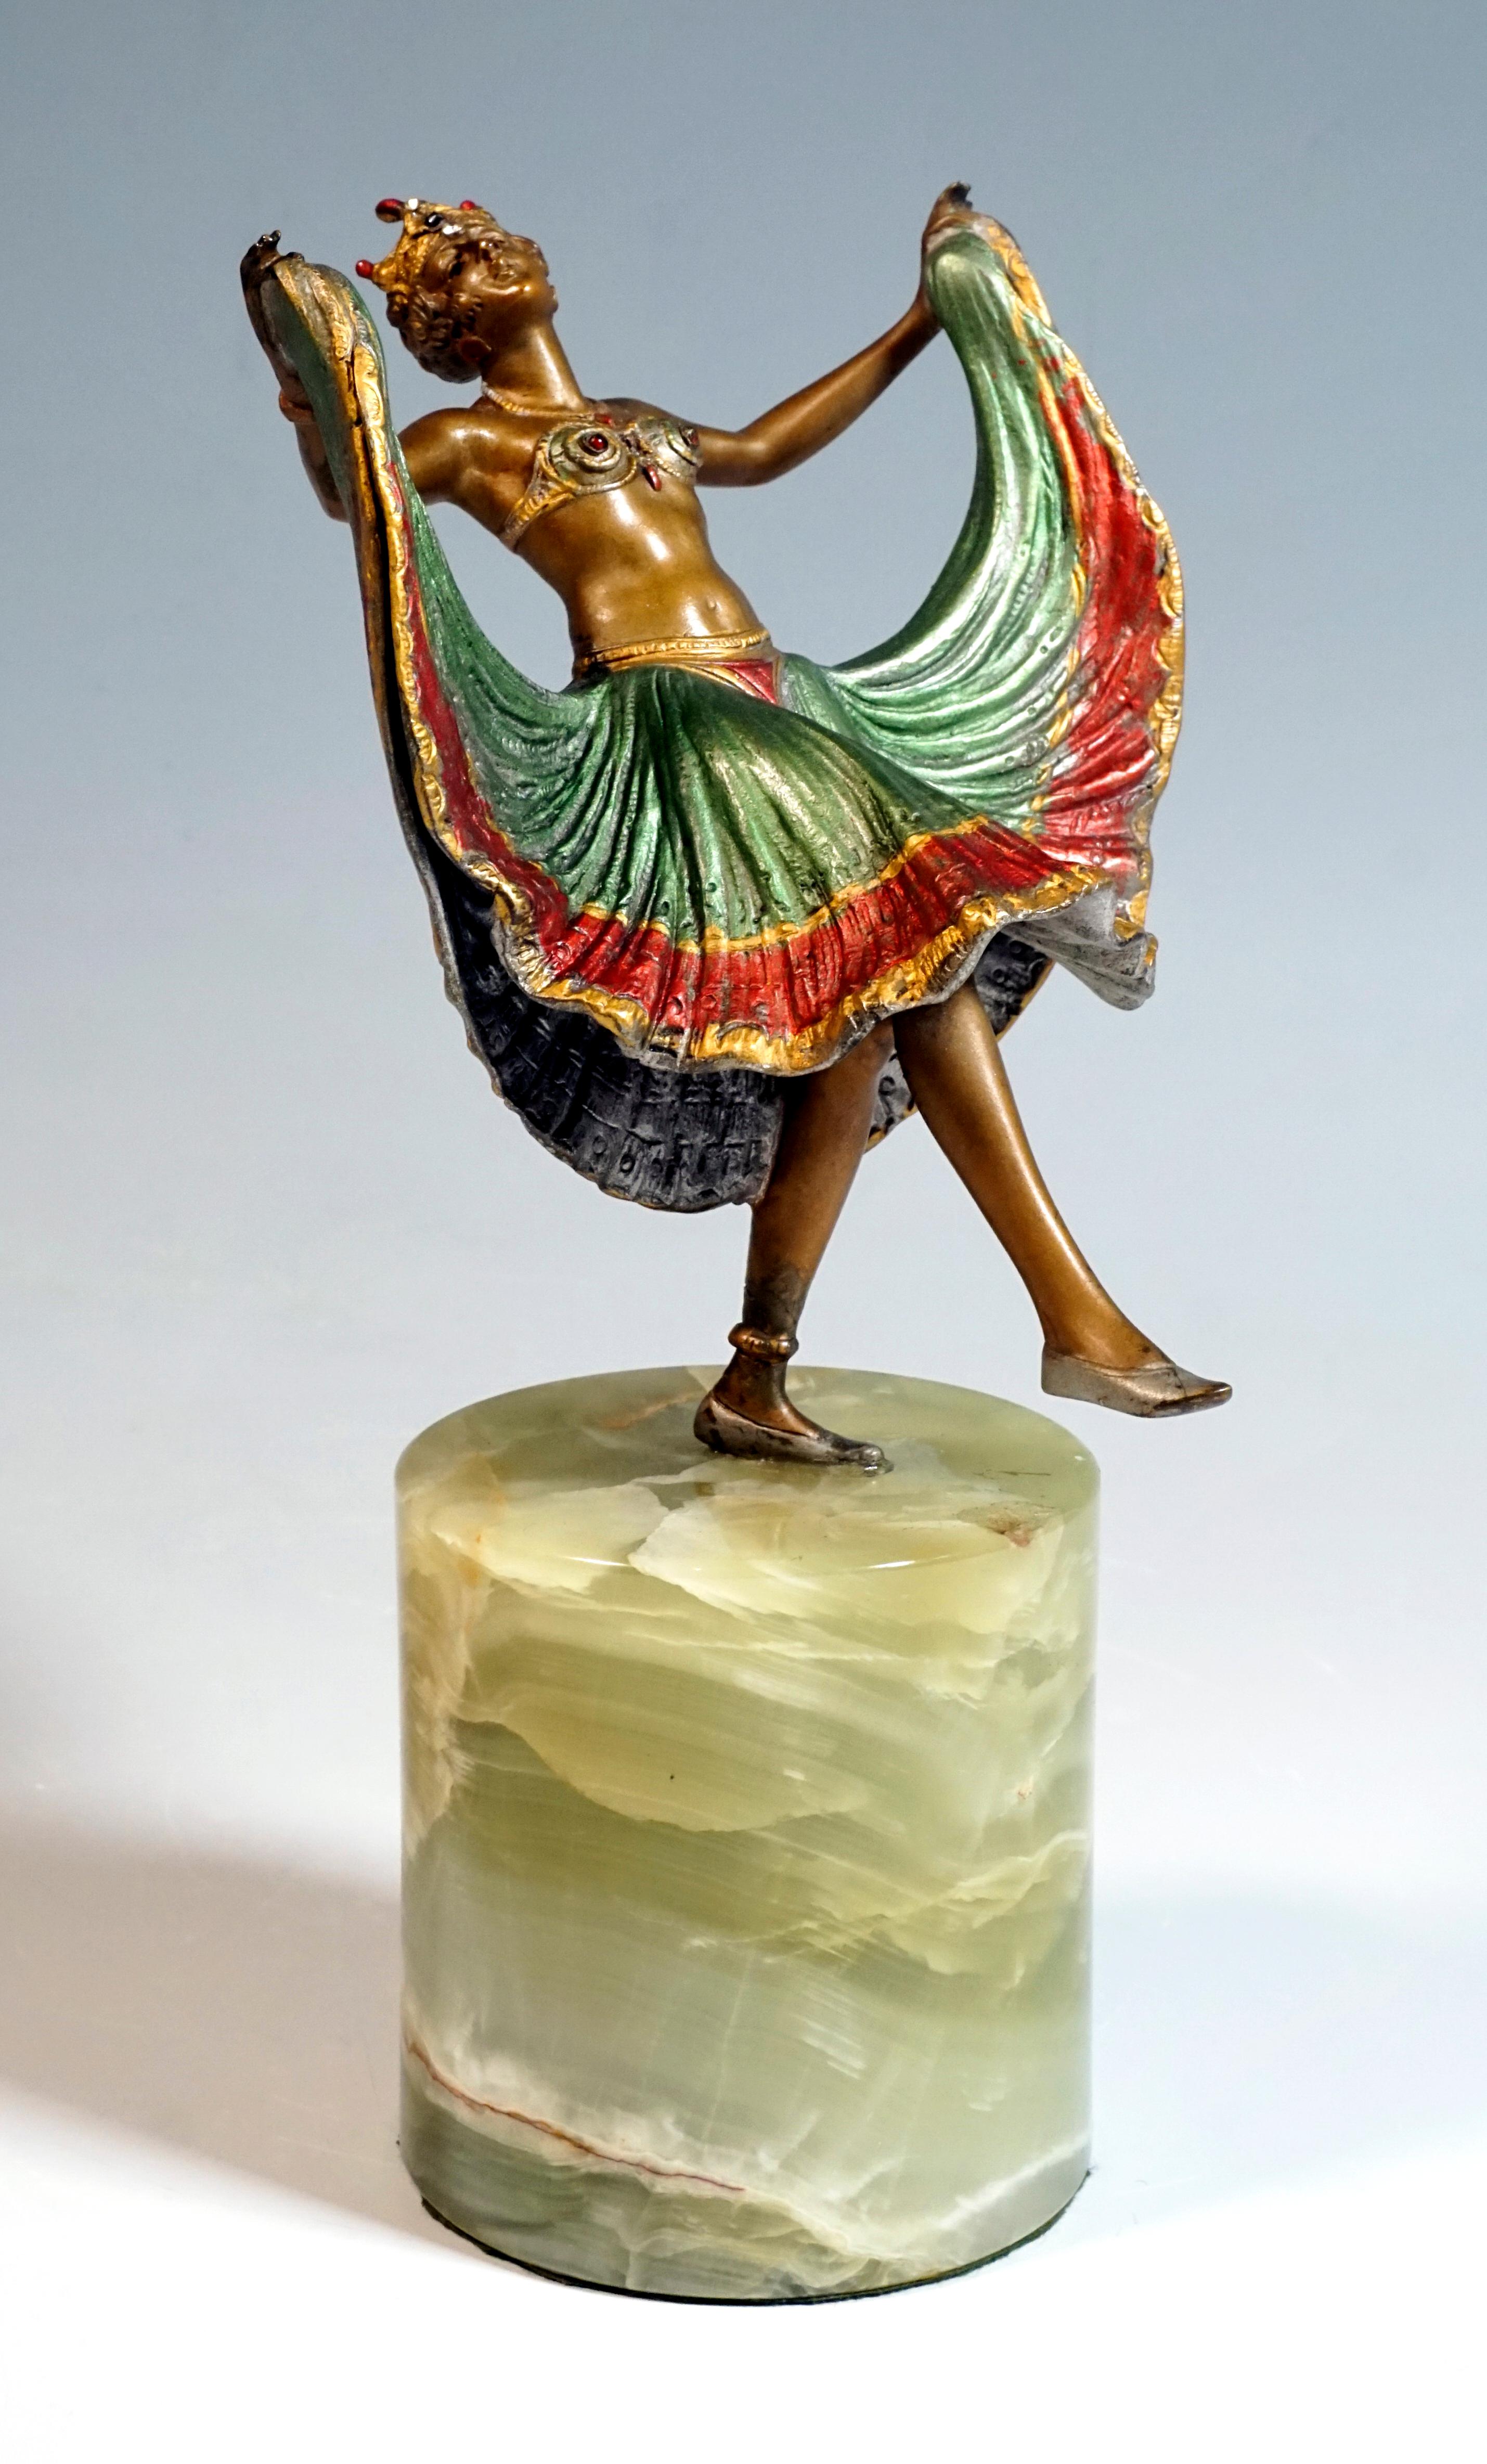 Young dancer in an oriental-style costume with a tight bustier, a wide skirt and a diadem set with gemstones, in a position leaning backwards, lifting the right leg forward and holding the skirt up like a fan at the side.
The figure is decorated in